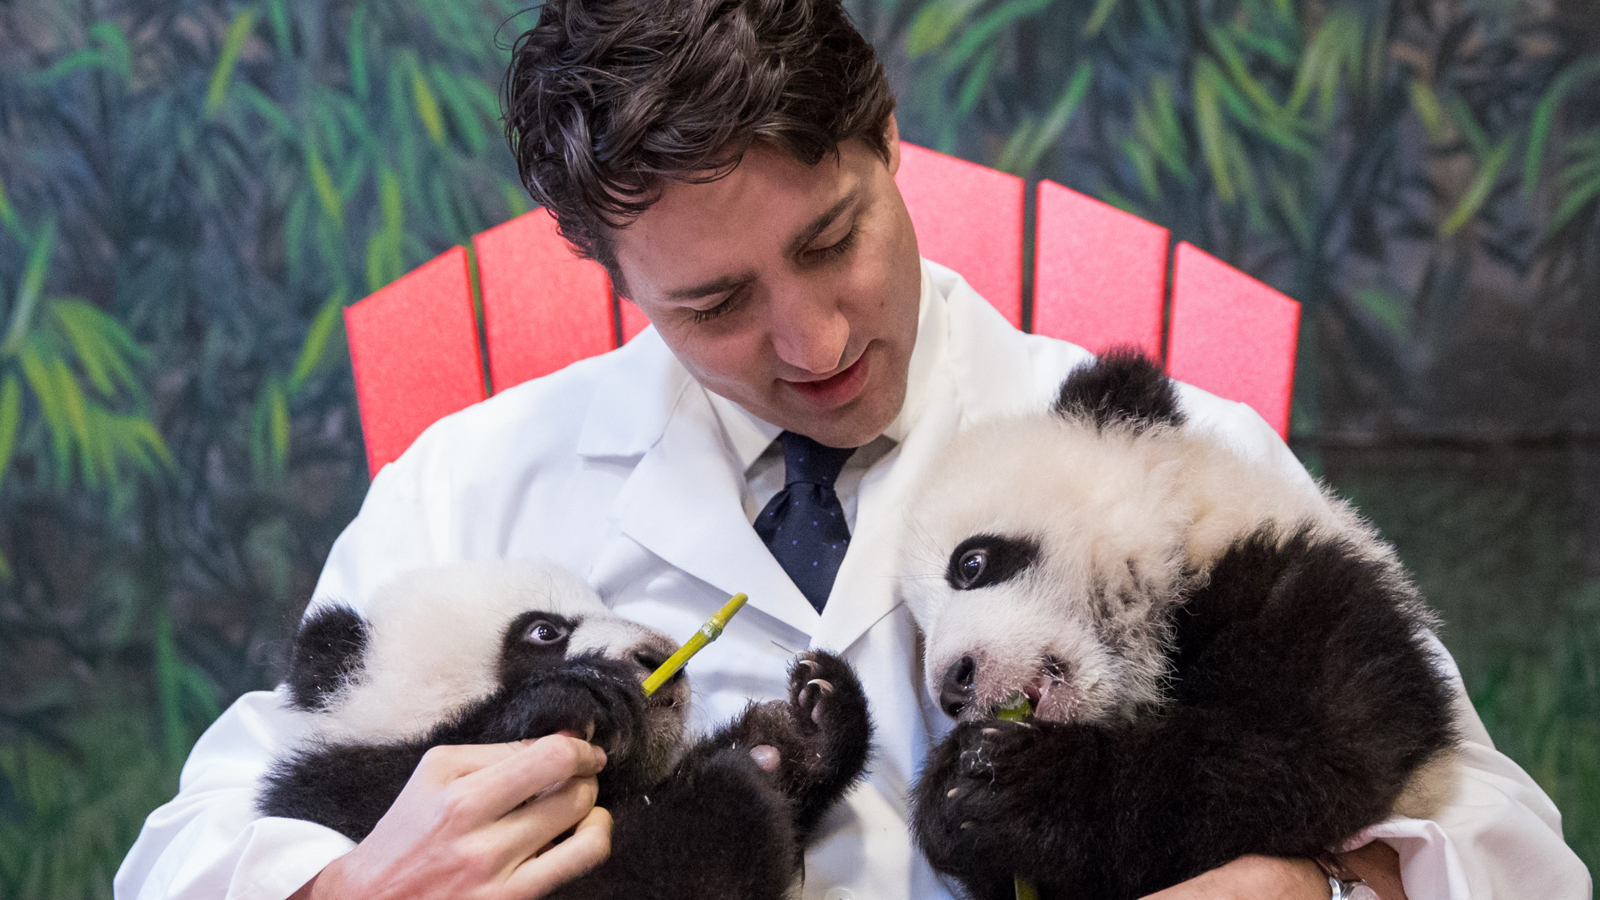 Canadian prime minister Justin Trudeau meets Toronto Zoo’s Jia Panpan (“Canadian Hope”) and Jia Yueyue (“Canadian Joy”). Also in attendance at the cubs’ naming ceremony in March 2016 were China’s ambassador to Canada, the premier of Ontario, and the mayor of Toronto.